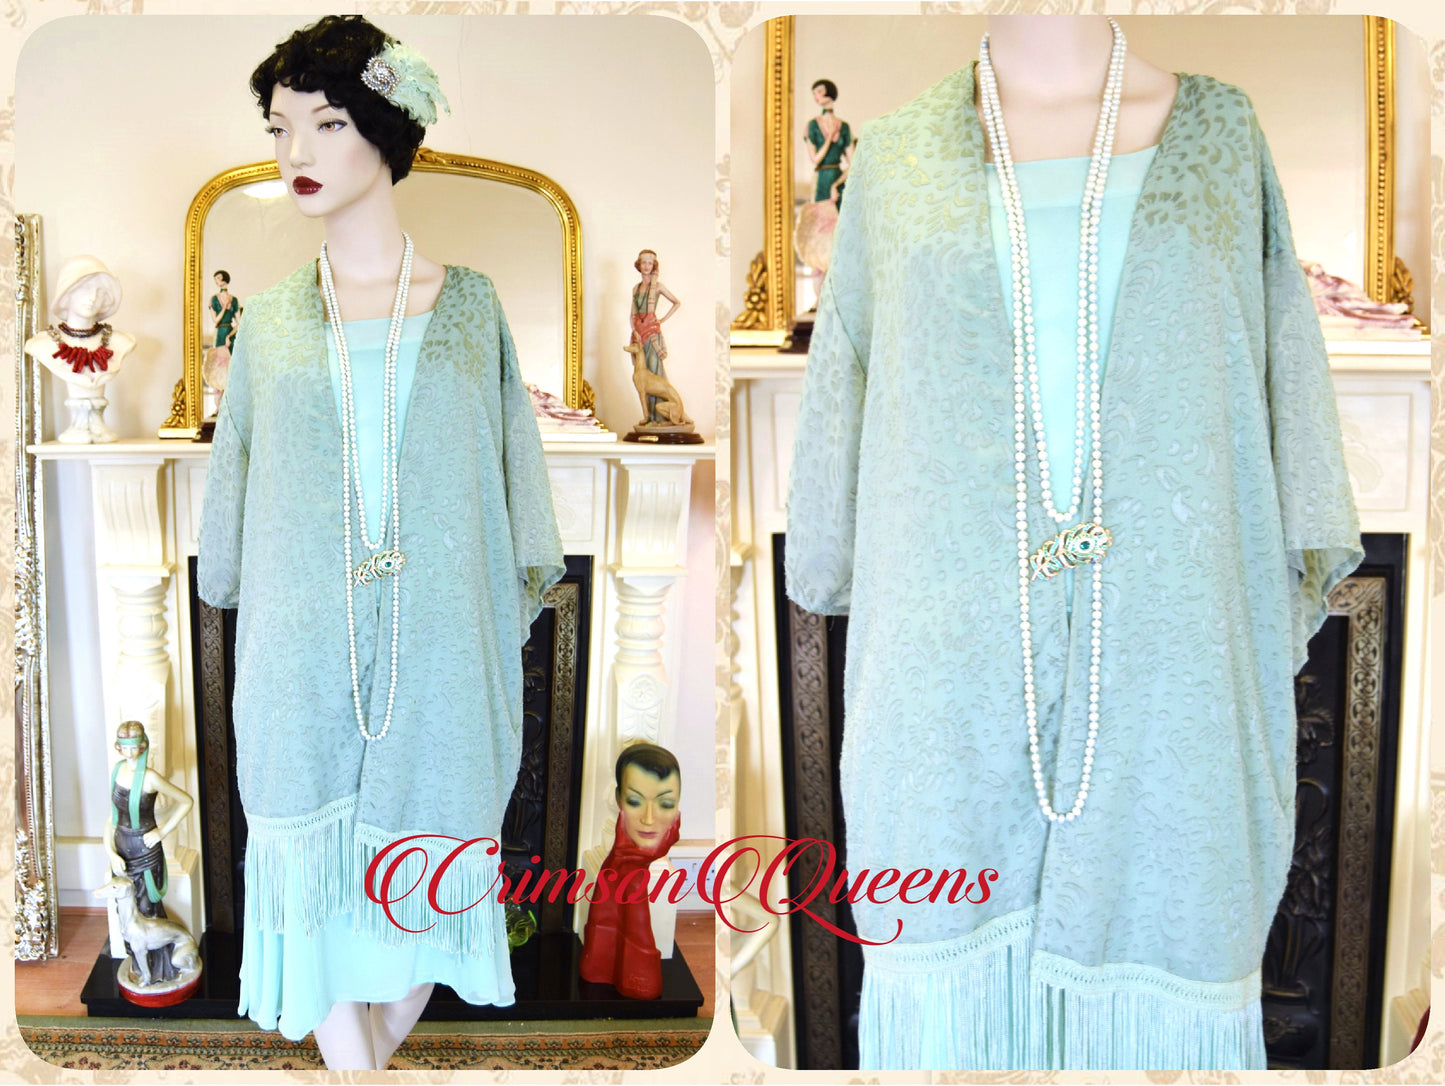 Vintage all silk celadon green 1920's style ethereal floaty summer cocktail garden flapper style dress  size US 10 12 US 6 8